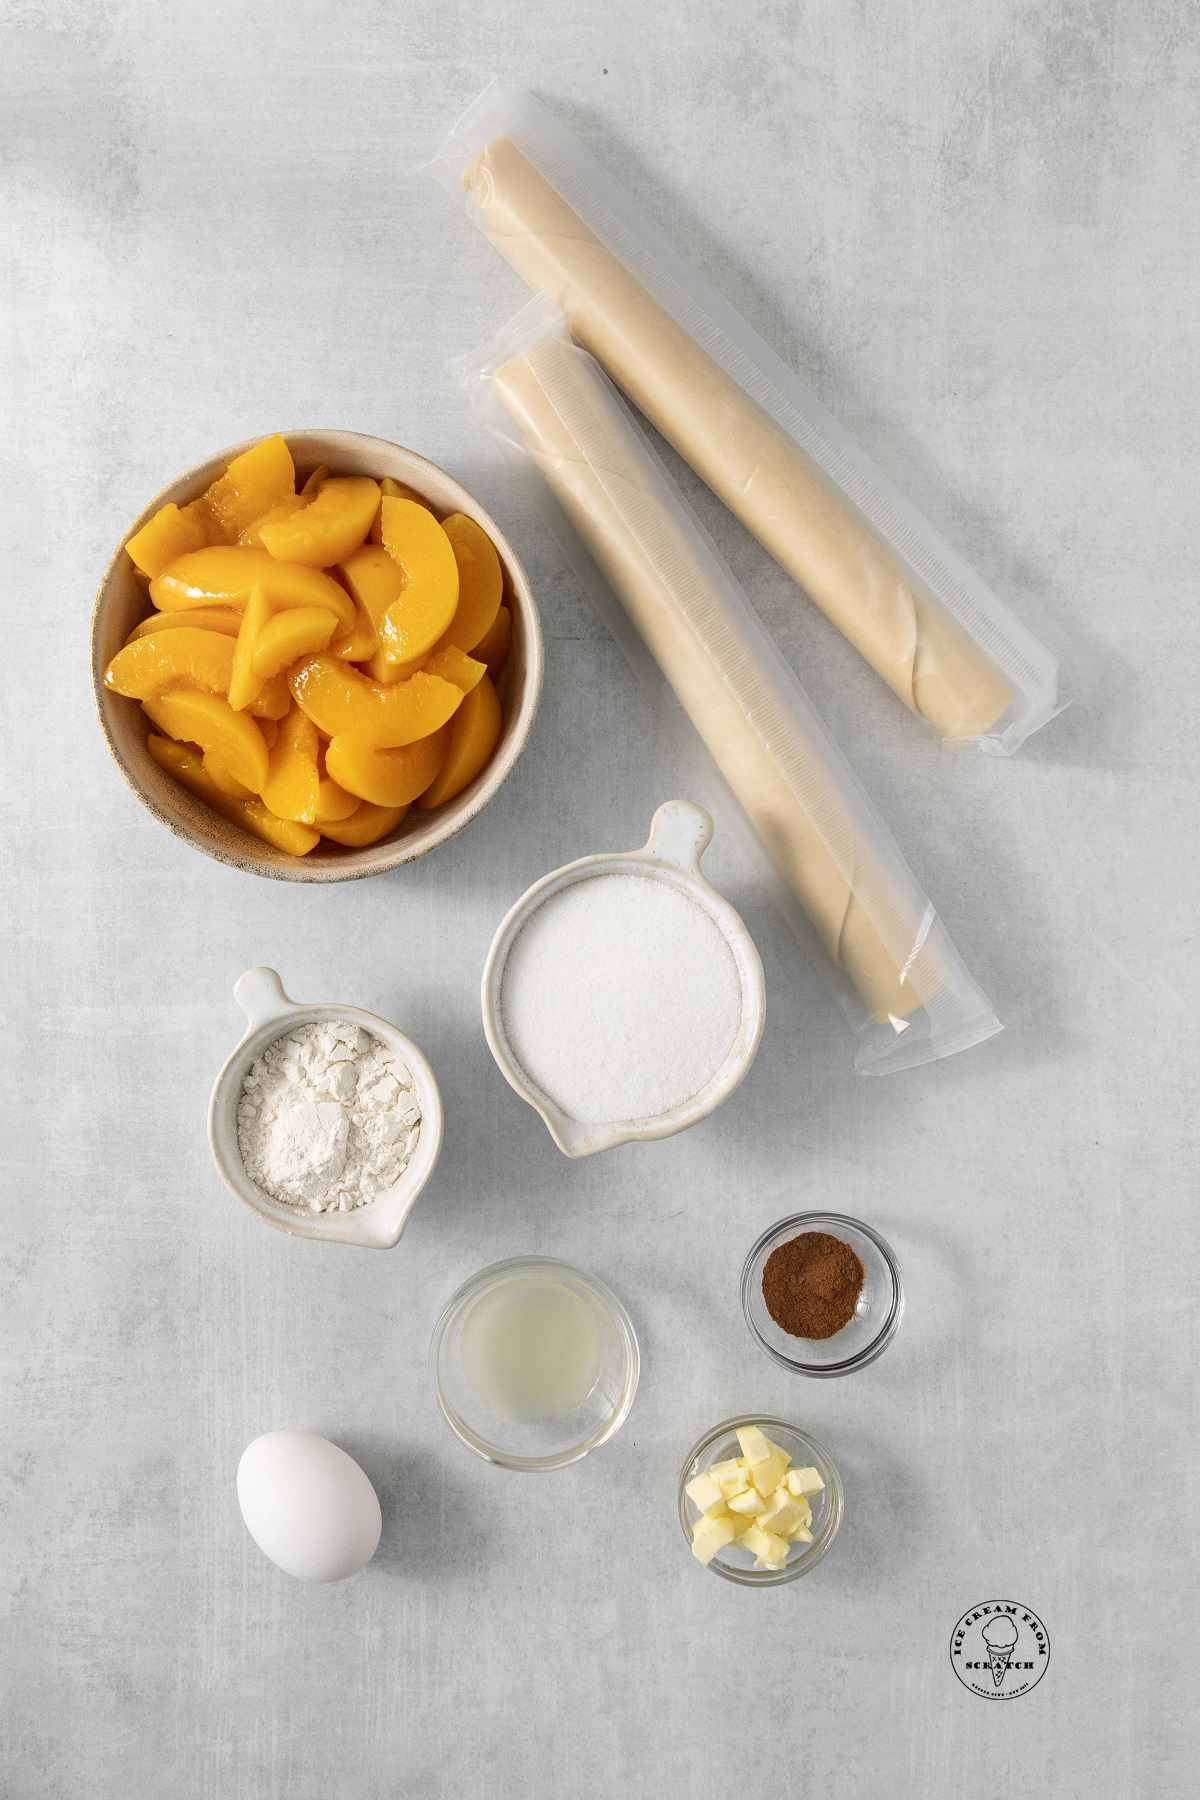 The ingredients needed to make an easy peach pie with canned peaches and refrigerated dough.